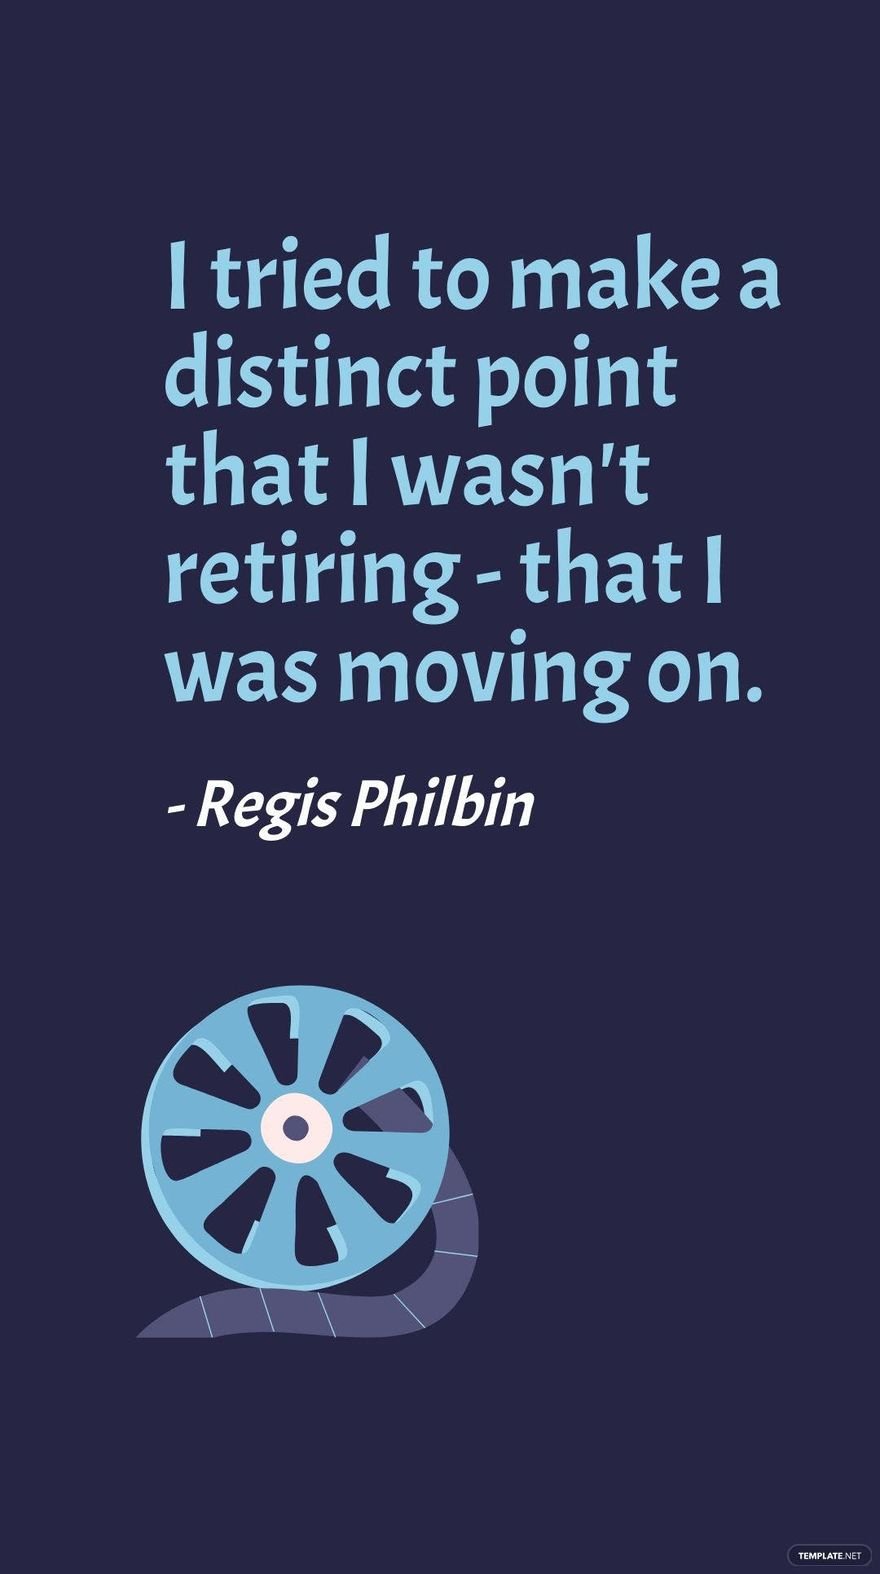 Free Regis Philbin - I tried to make a distinct point that I wasn't retiring - that I was moving on.